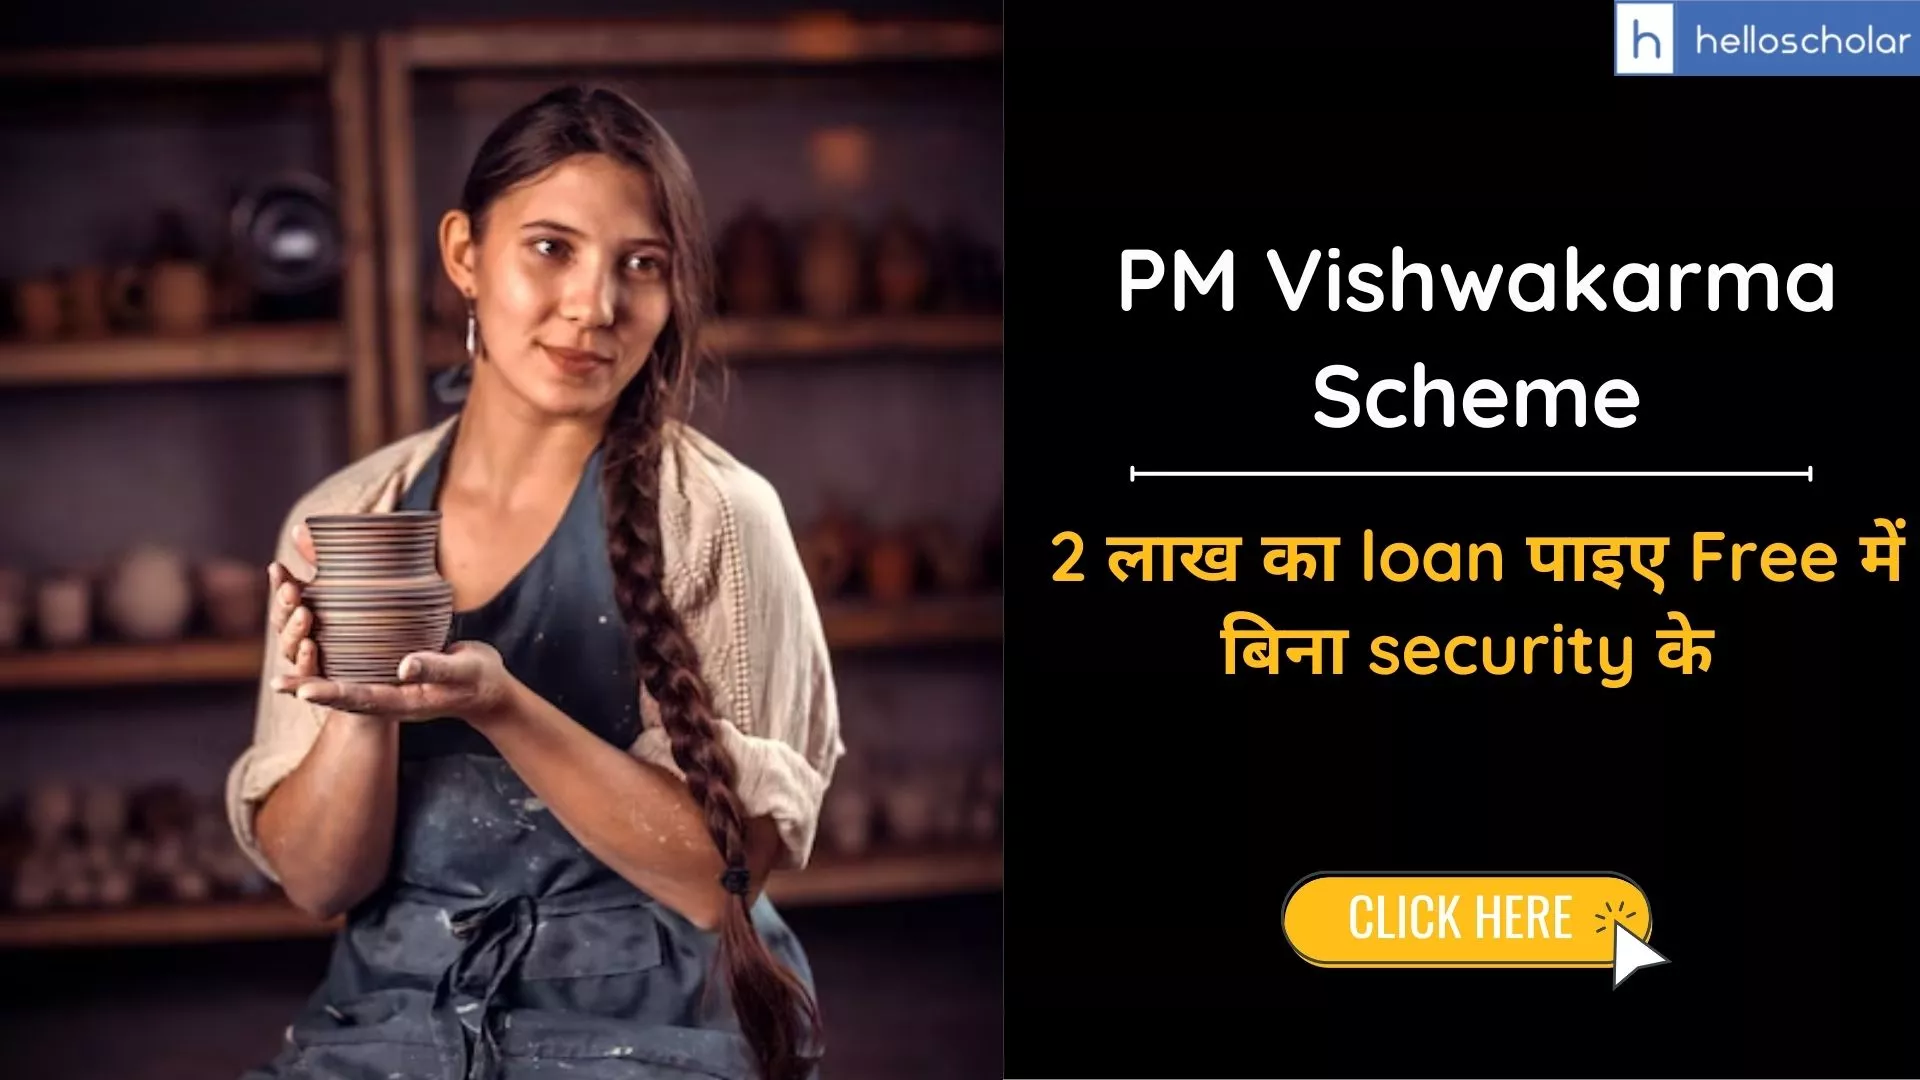 Govt has launched PM Vishwakarma Scheme, Apply and Get Rs.2 lac loan without any security